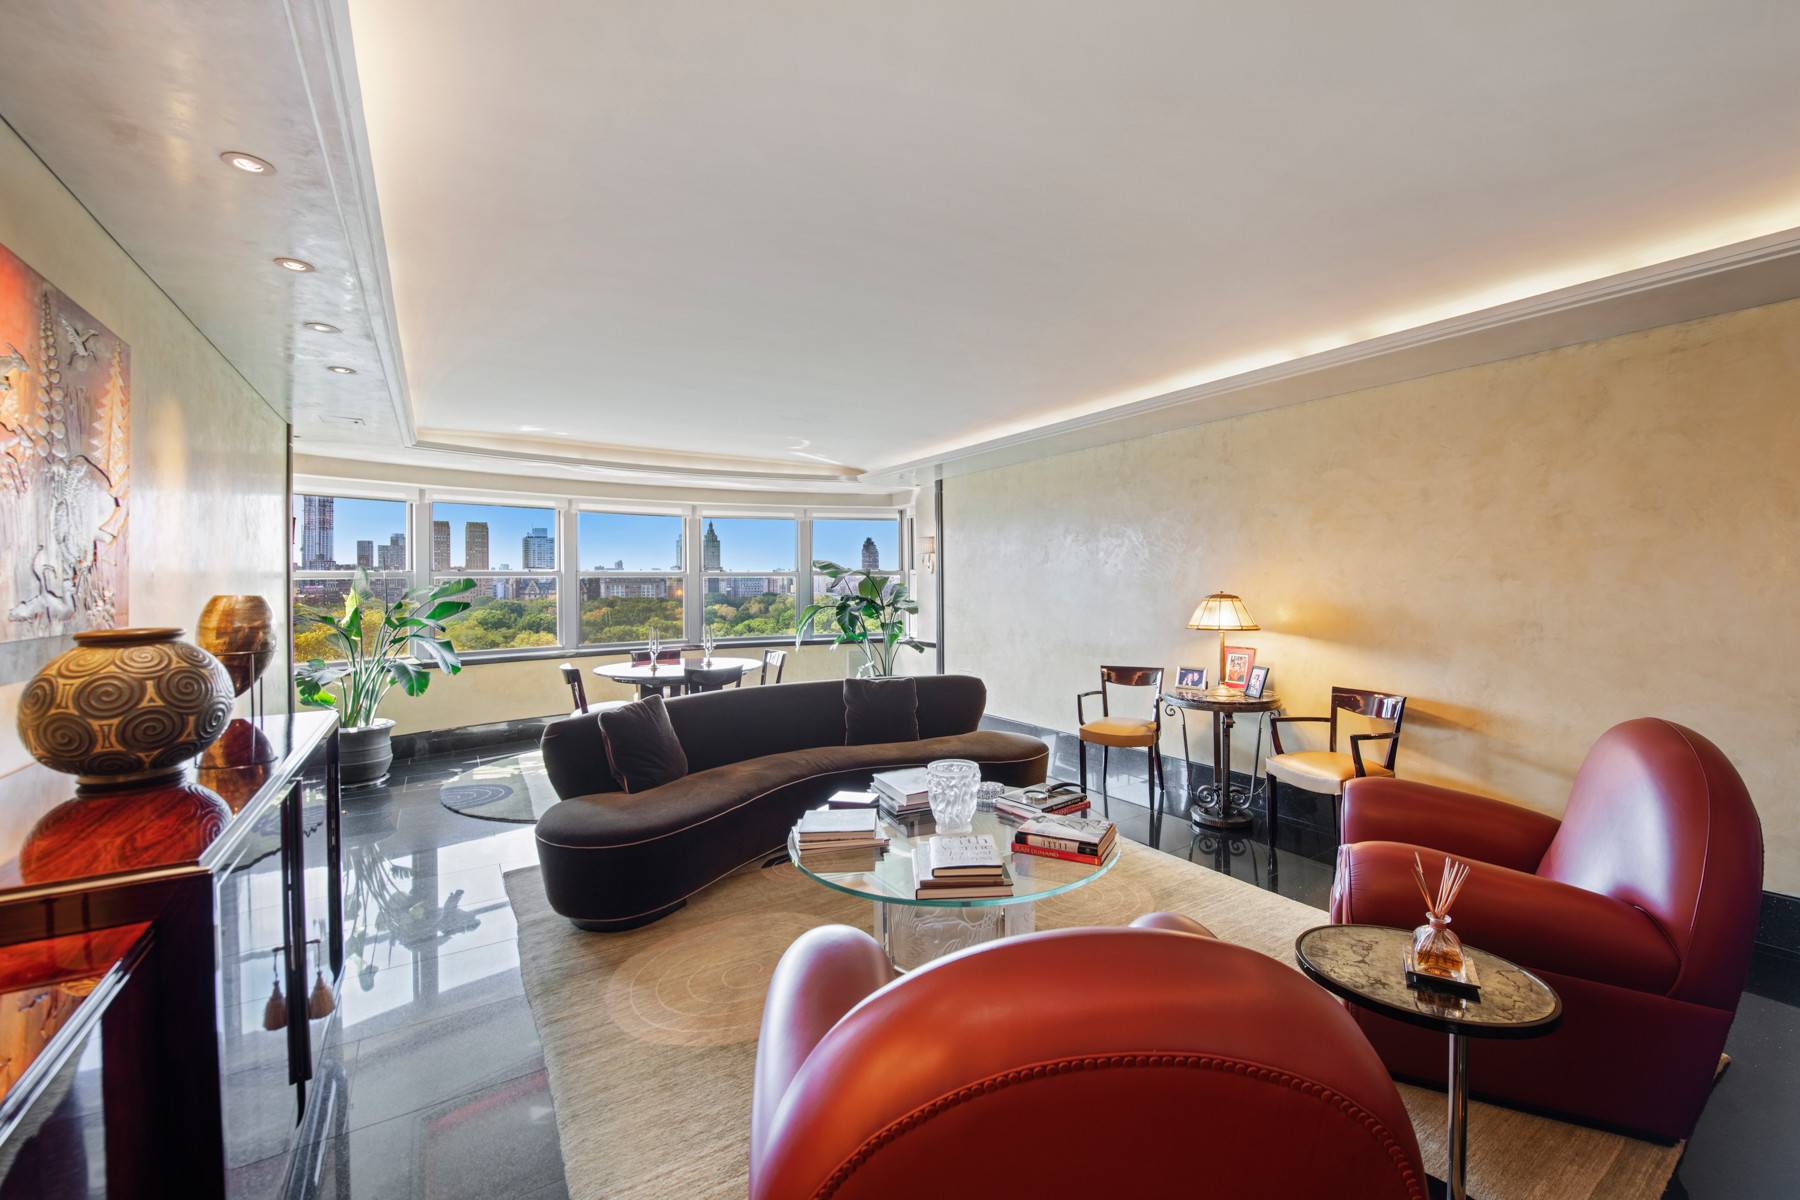 Spectacular residence on the most prestigious block of Fifth Avenue with unobstructed Central Park and Fifth Avenue views, designed by James Thompson, formerly with the renowned David Easton designers.